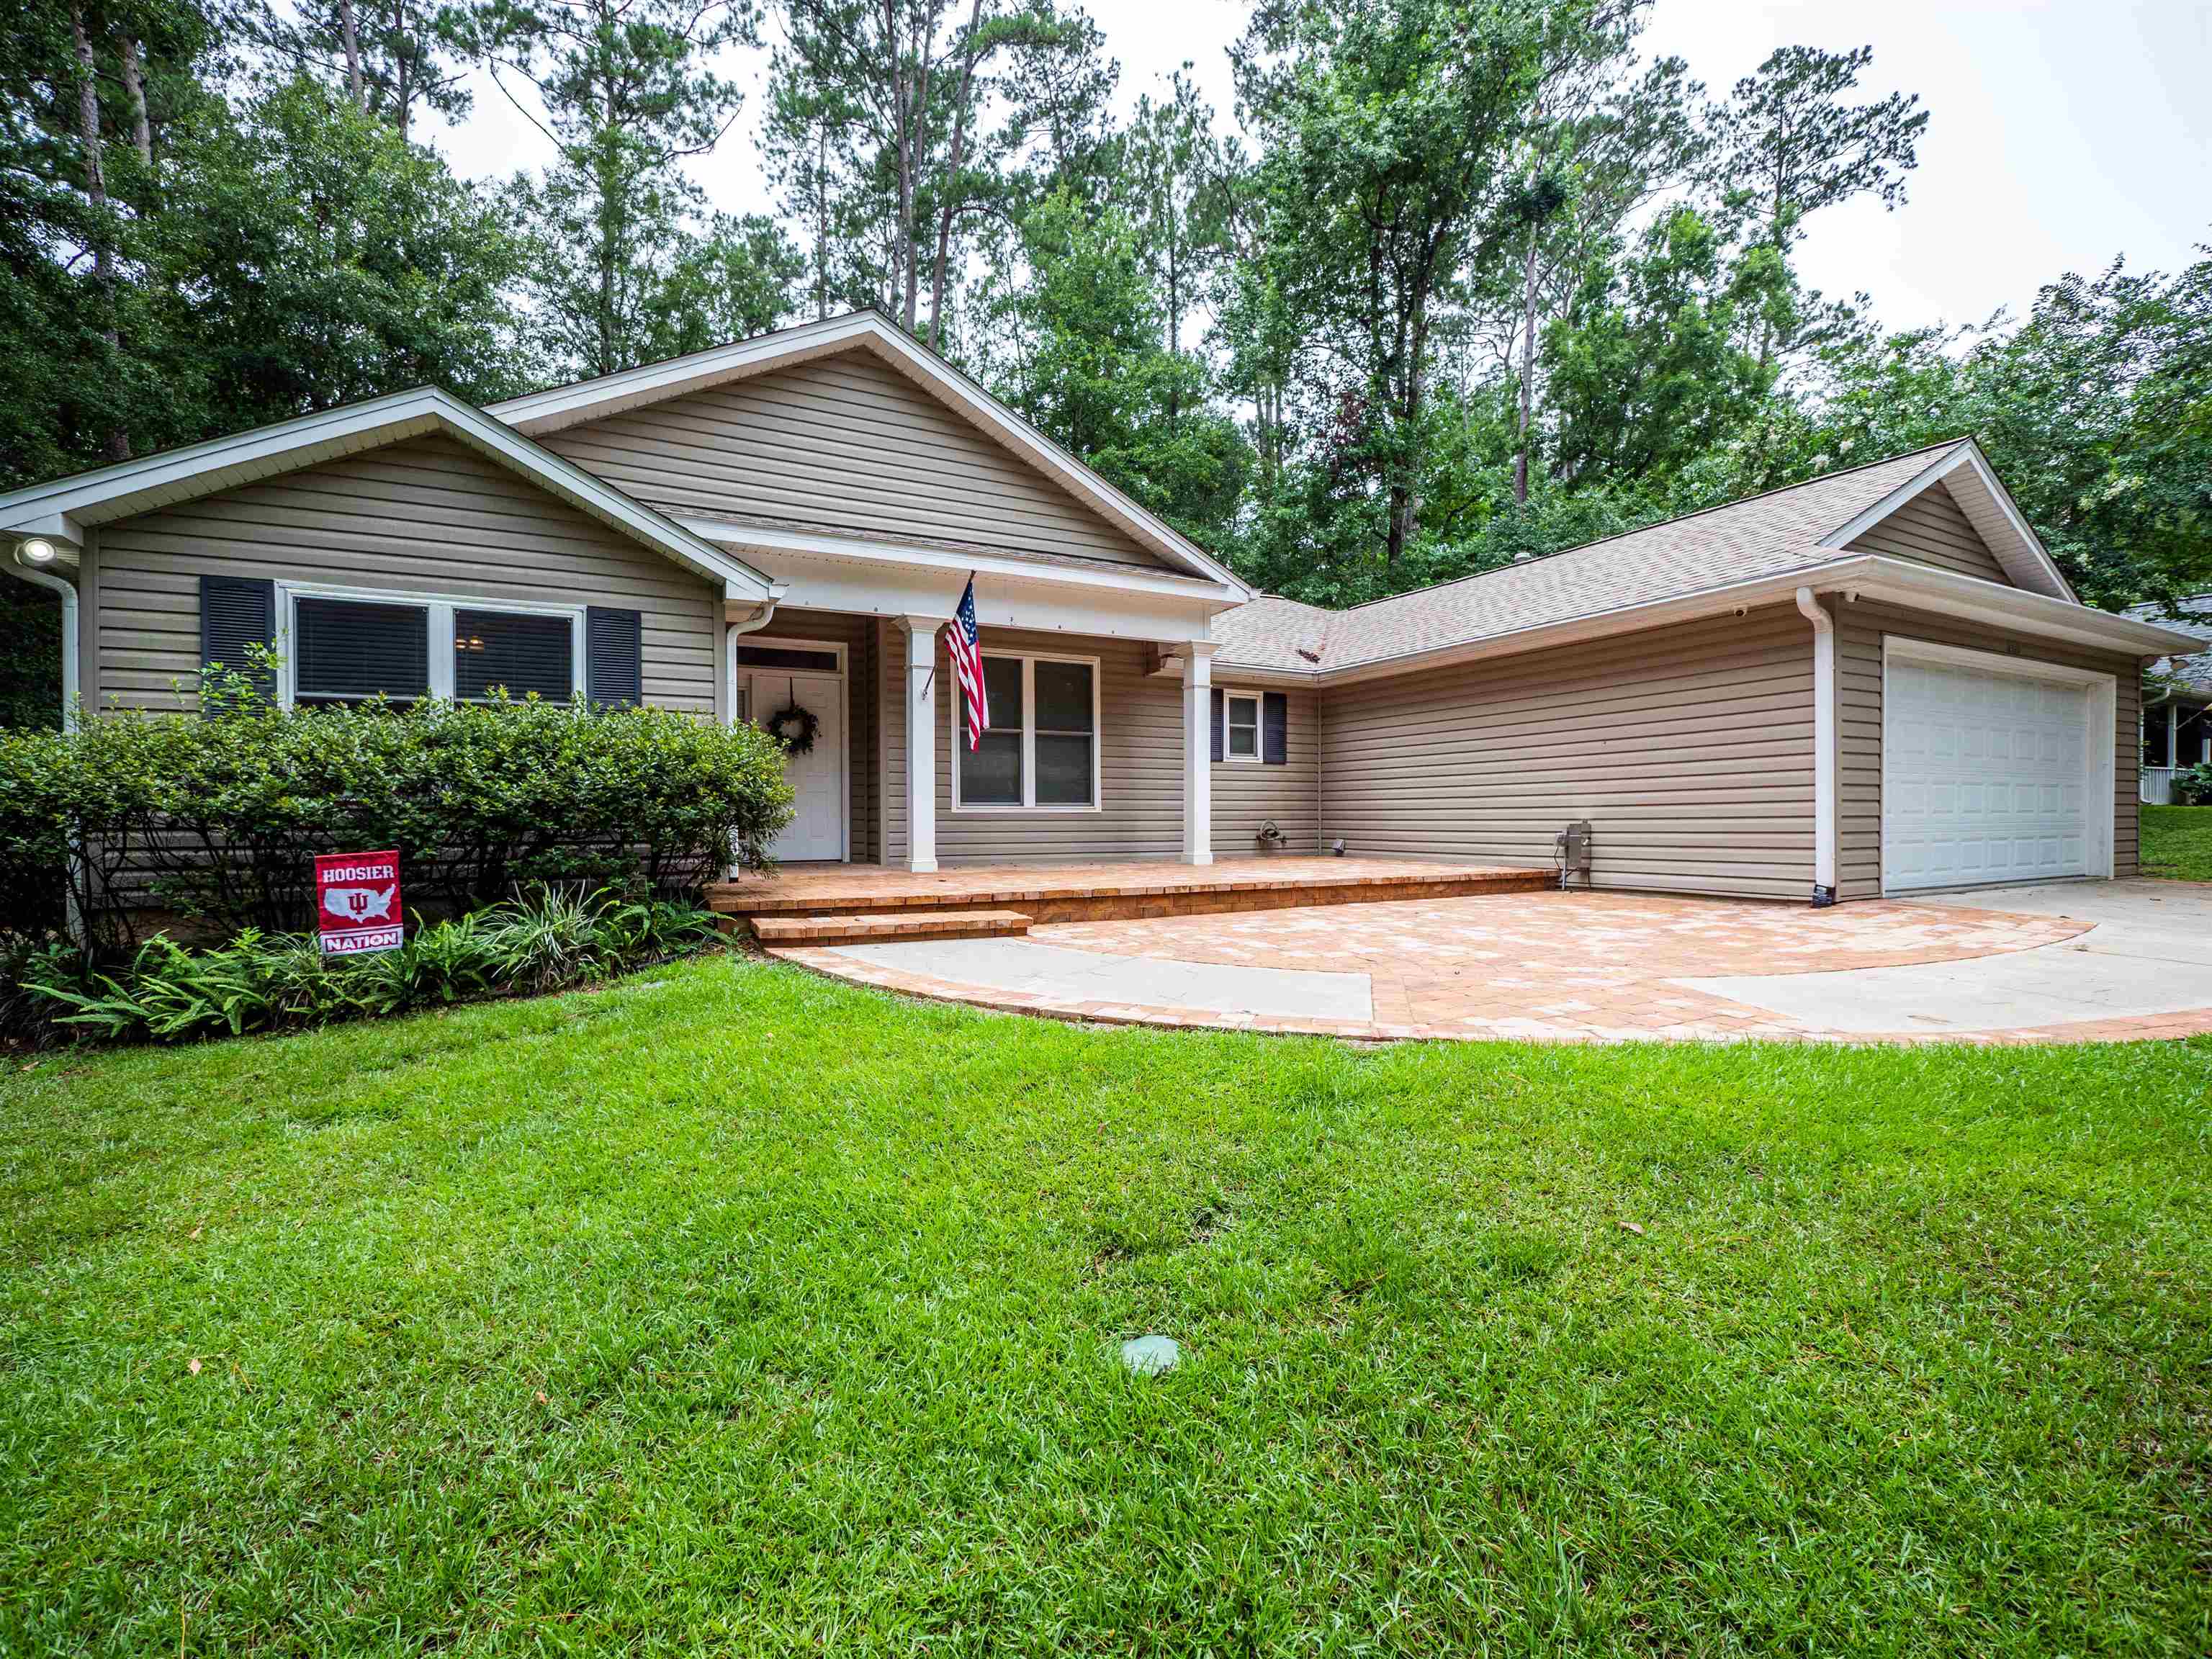 3321 Micanopy Trail,TALLAHASSEE,Florida 32312,3 Bedrooms Bedrooms,2 BathroomsBathrooms,Detached single family,3321 Micanopy Trail,361473